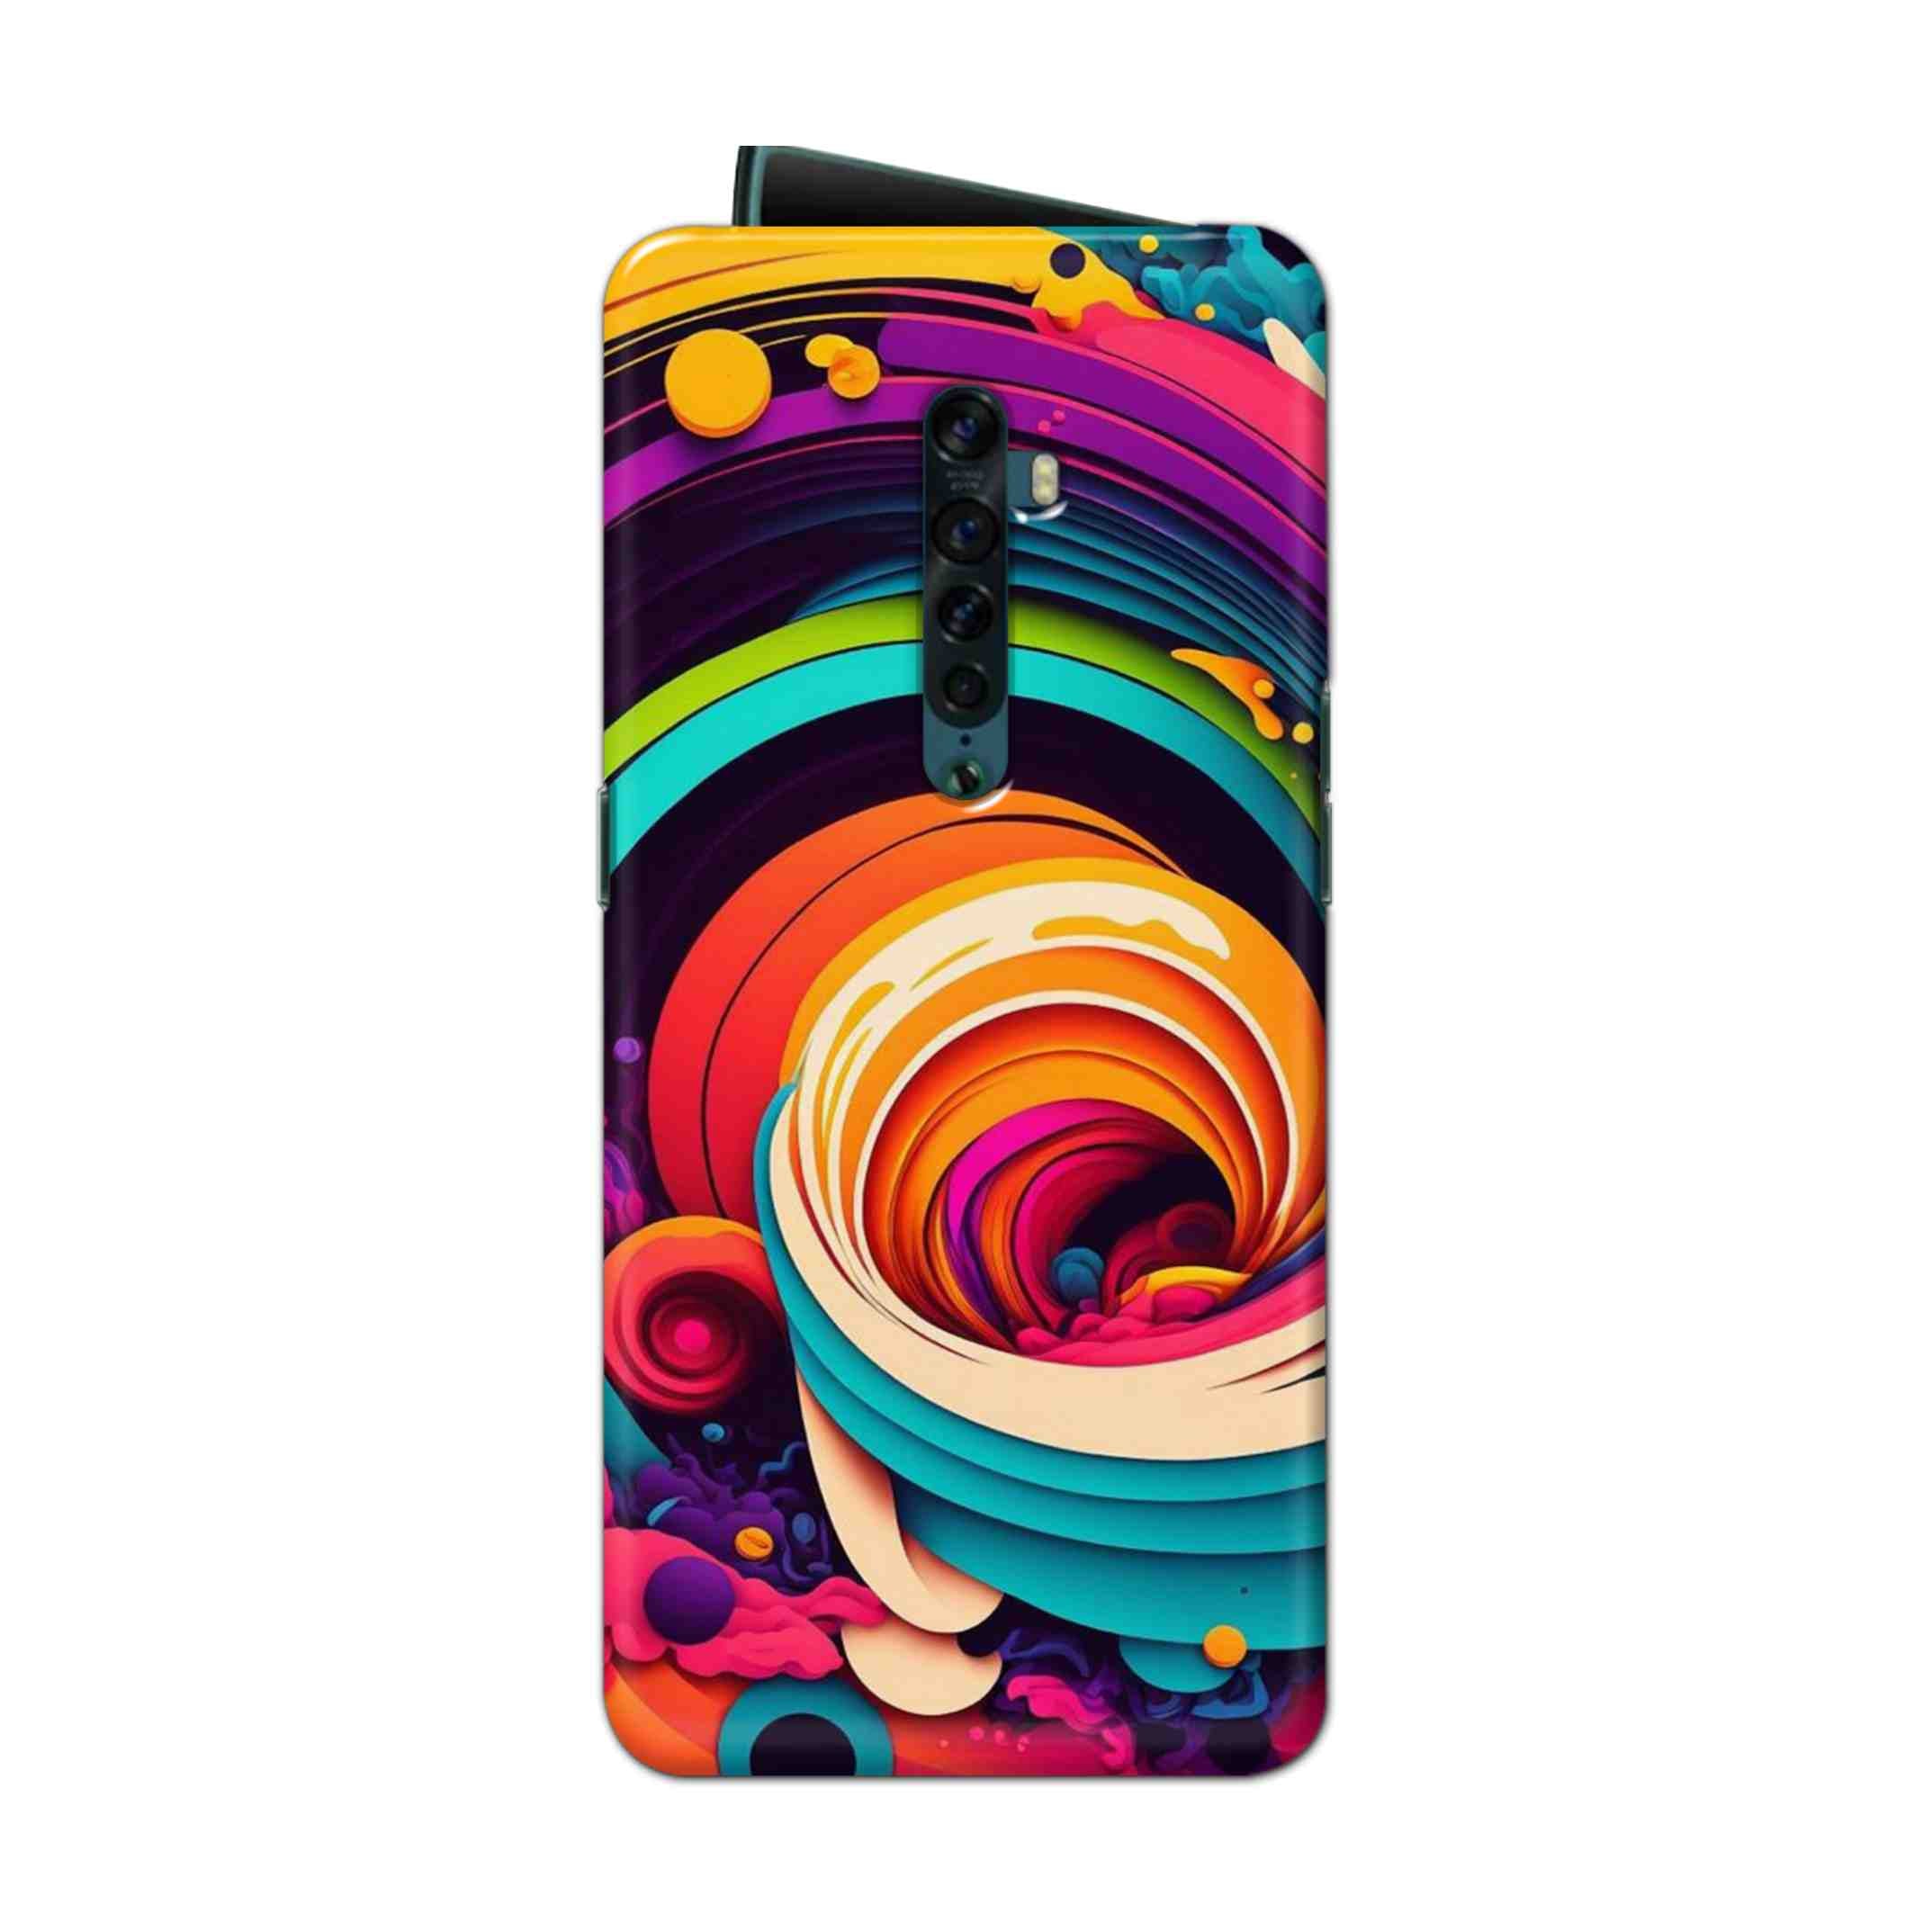 Buy Colour Circle Hard Back Mobile Phone Case Cover For Oppo Reno 2 Online